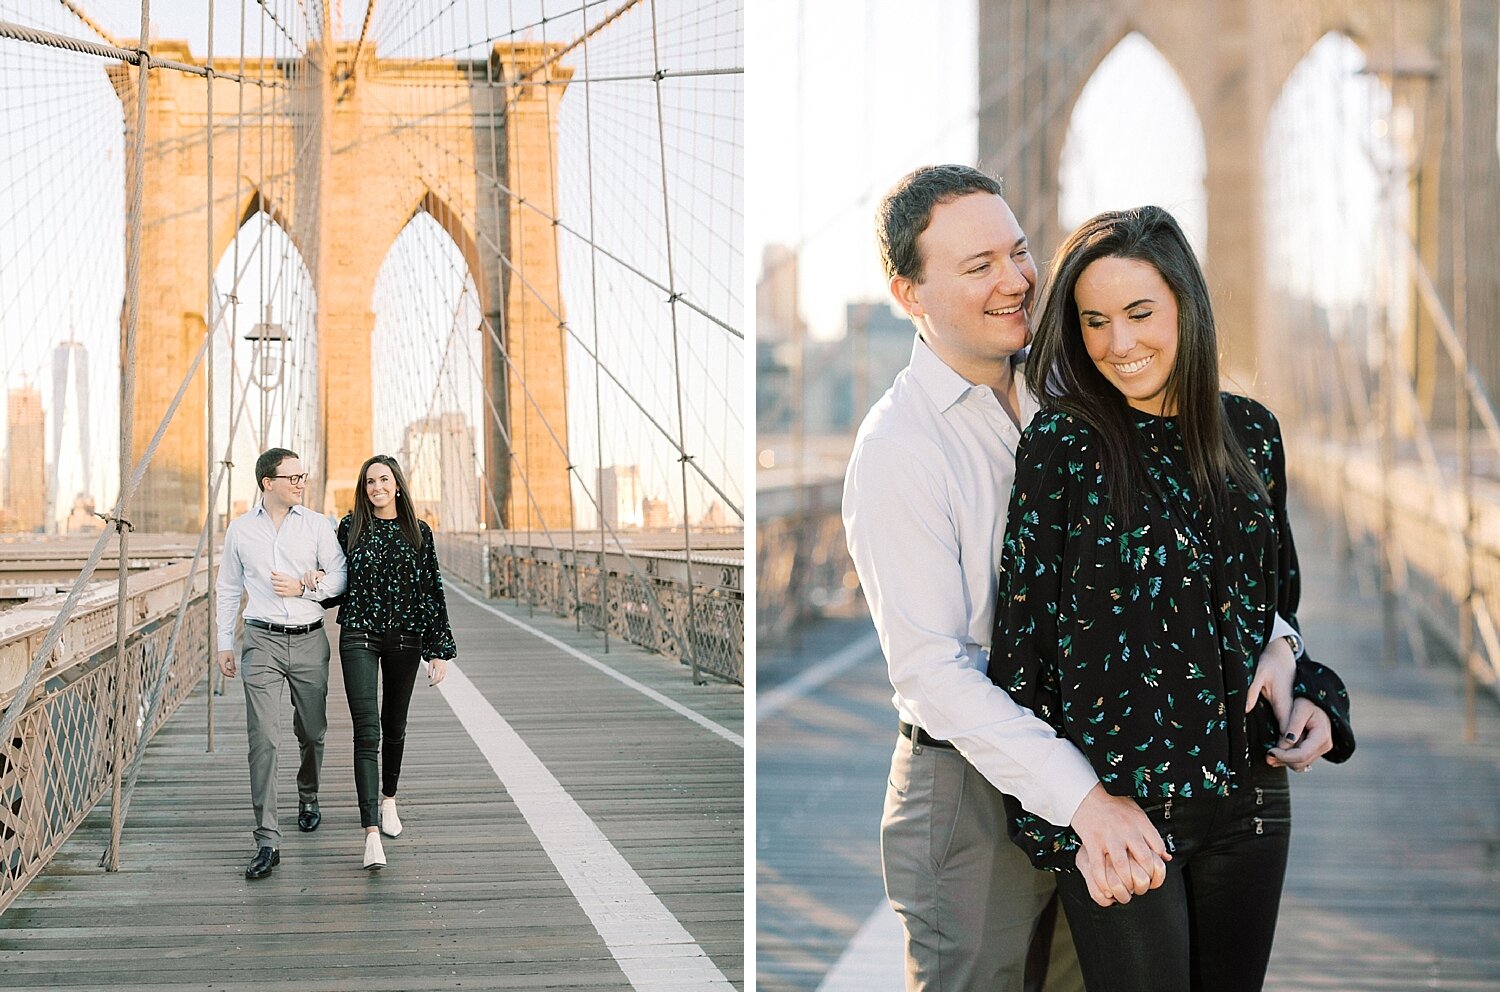 Brooklyn Bridge engagement session photographed by NYC wedding photographer Asher Gardner Photography